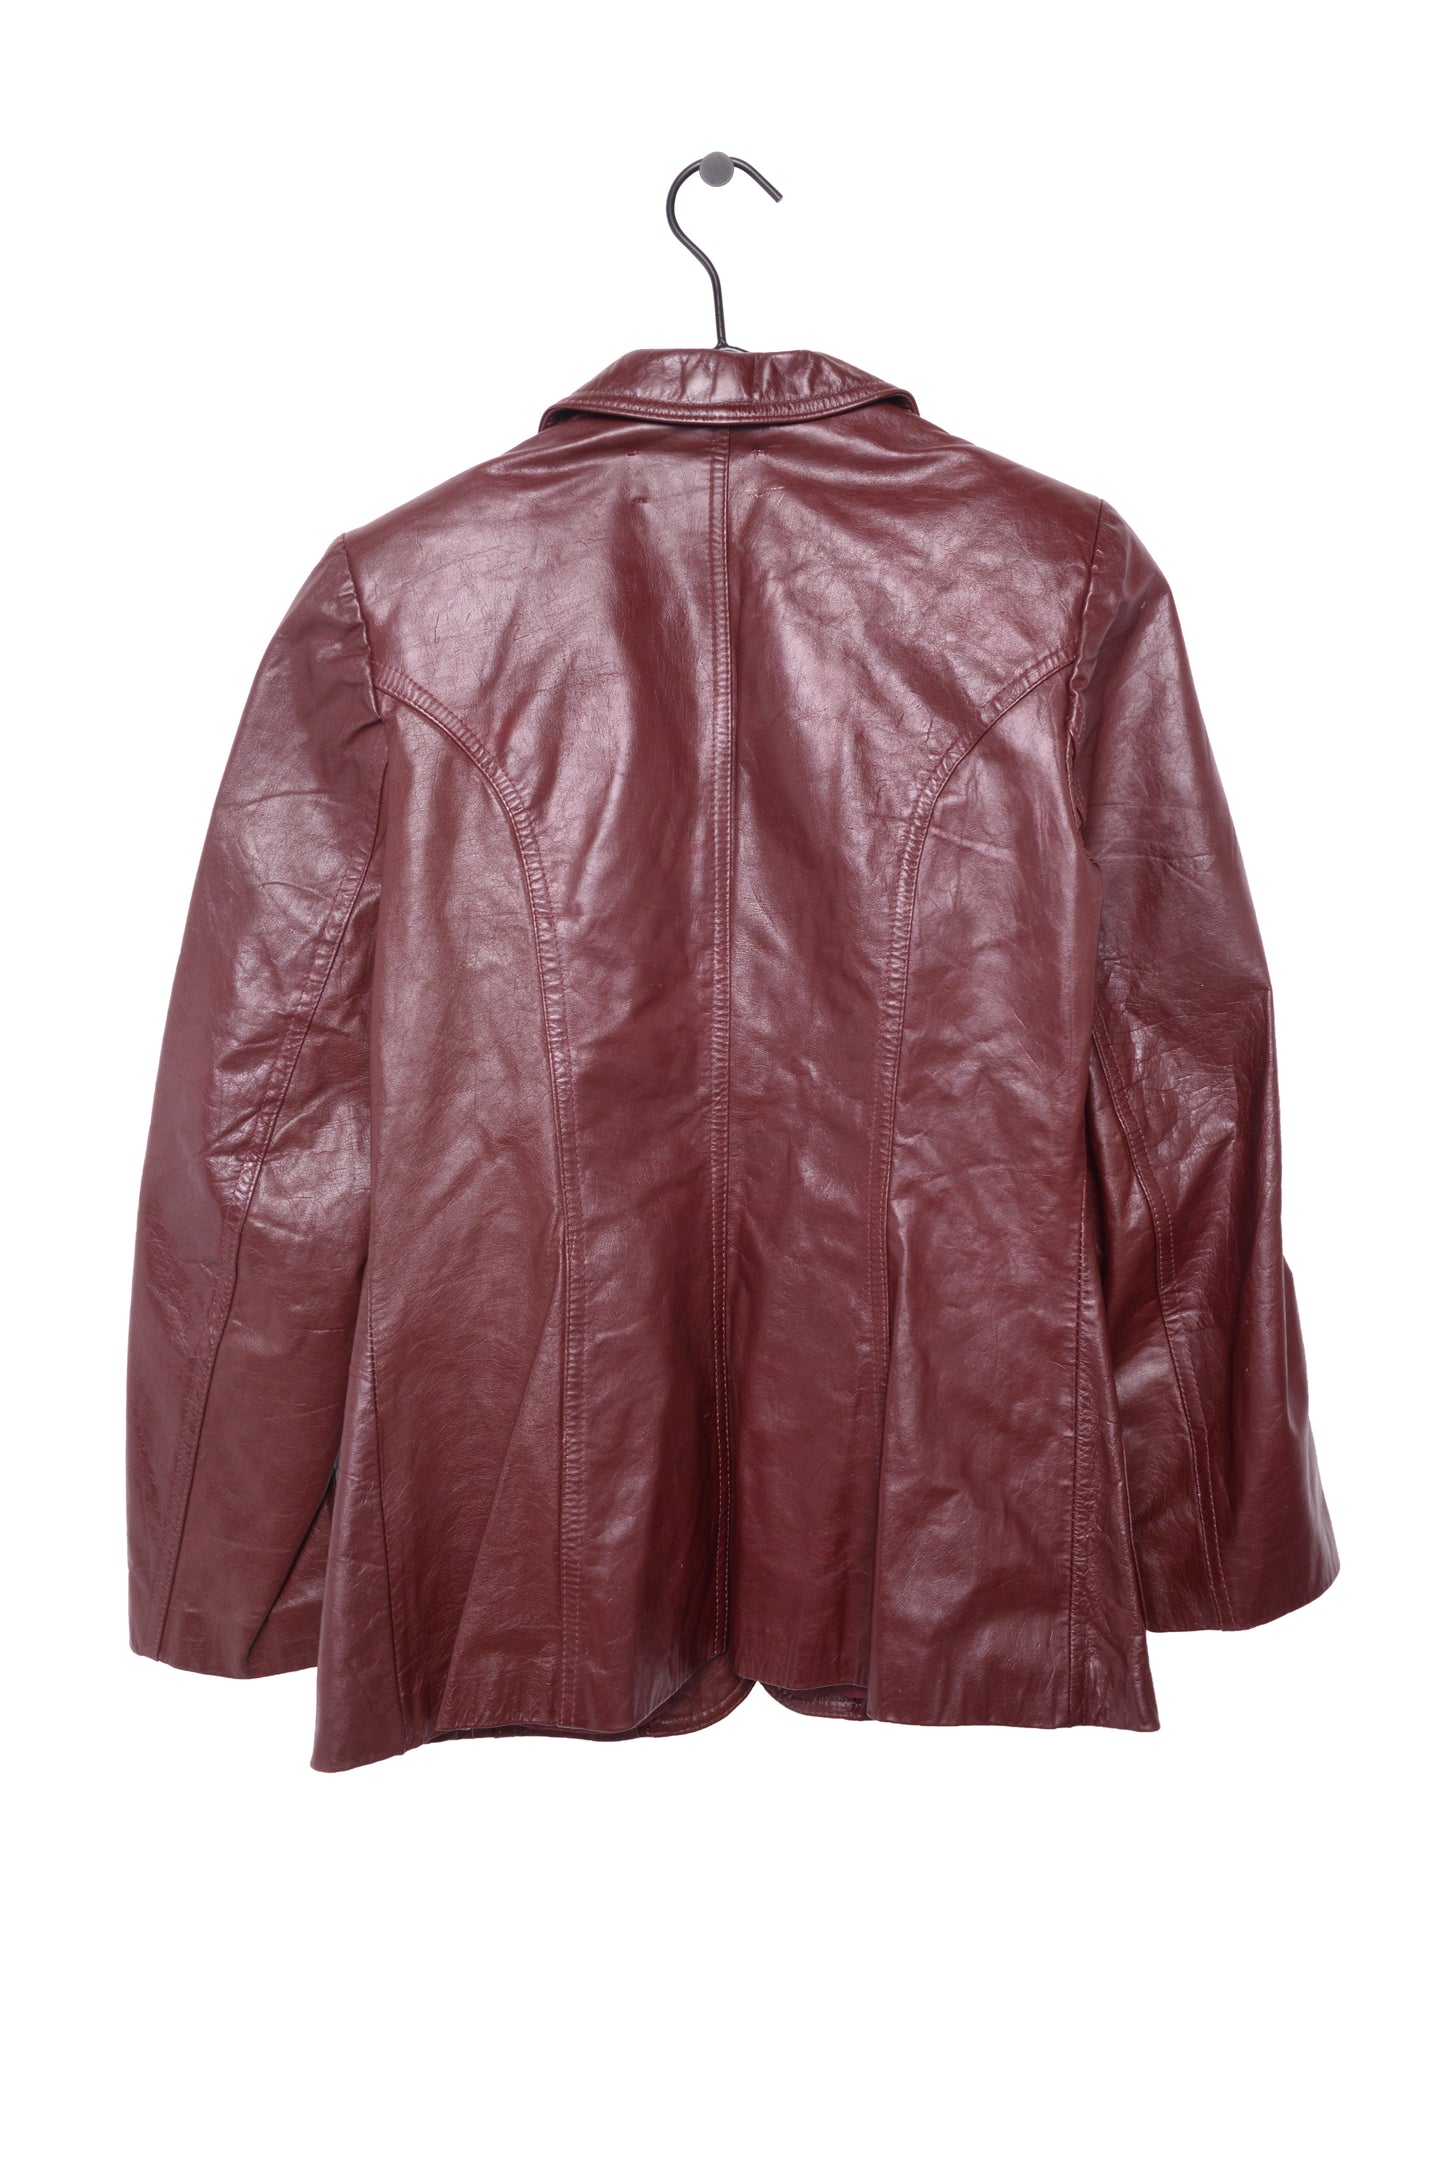 Burgundy Leather Jacket Free Shipping - The Vintage Twin